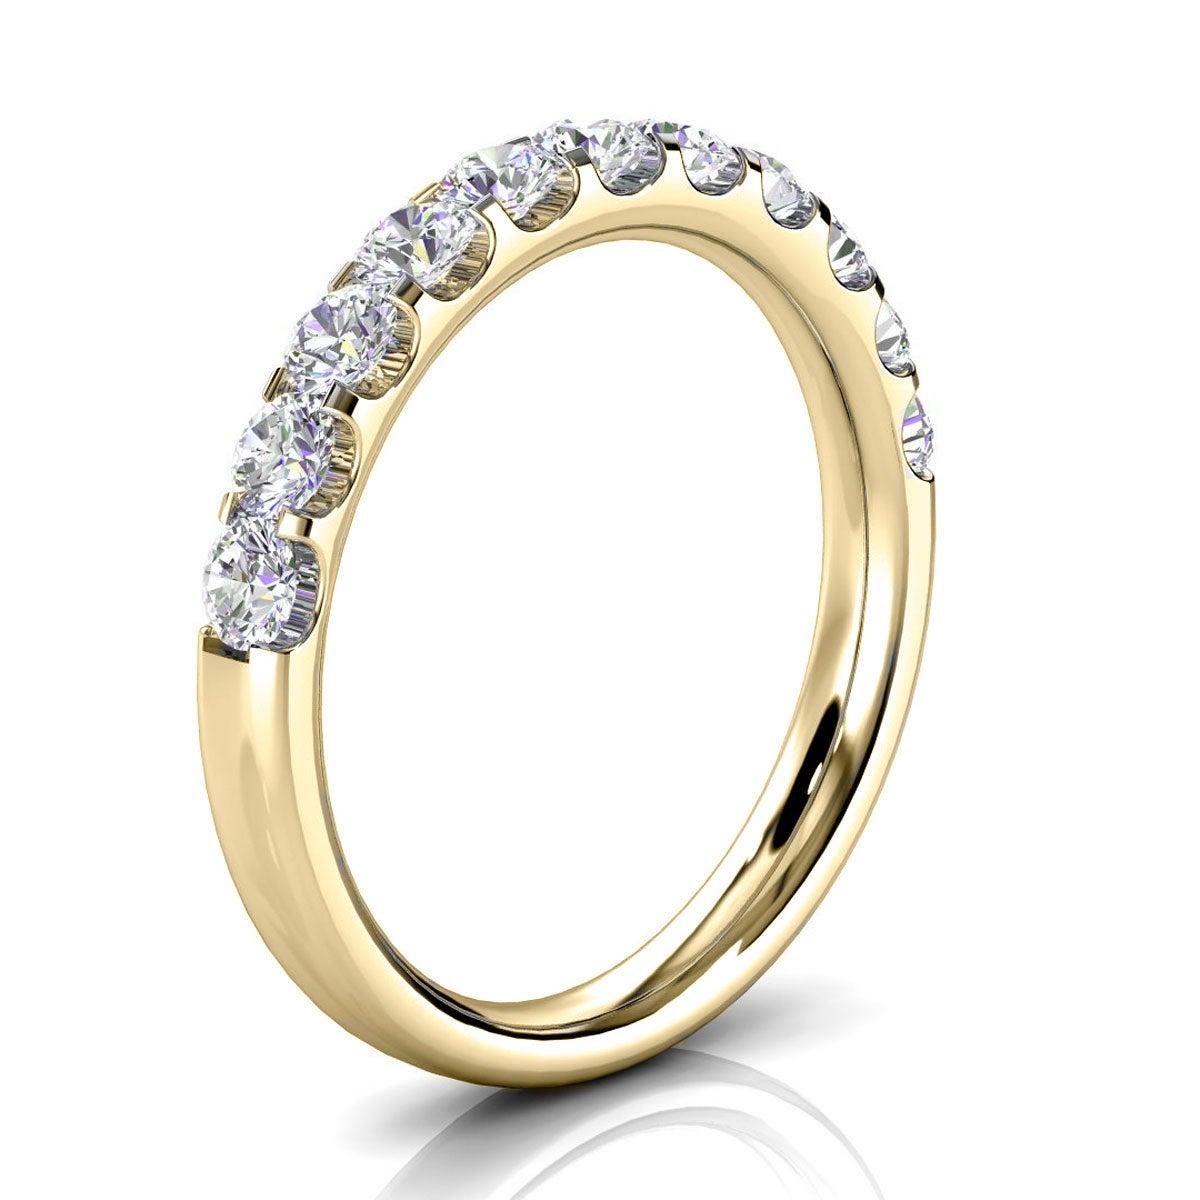 For Sale:  18K Yellow Gold Valerie Micro-Prong Diamond Ring '1 Ct. tw' 2